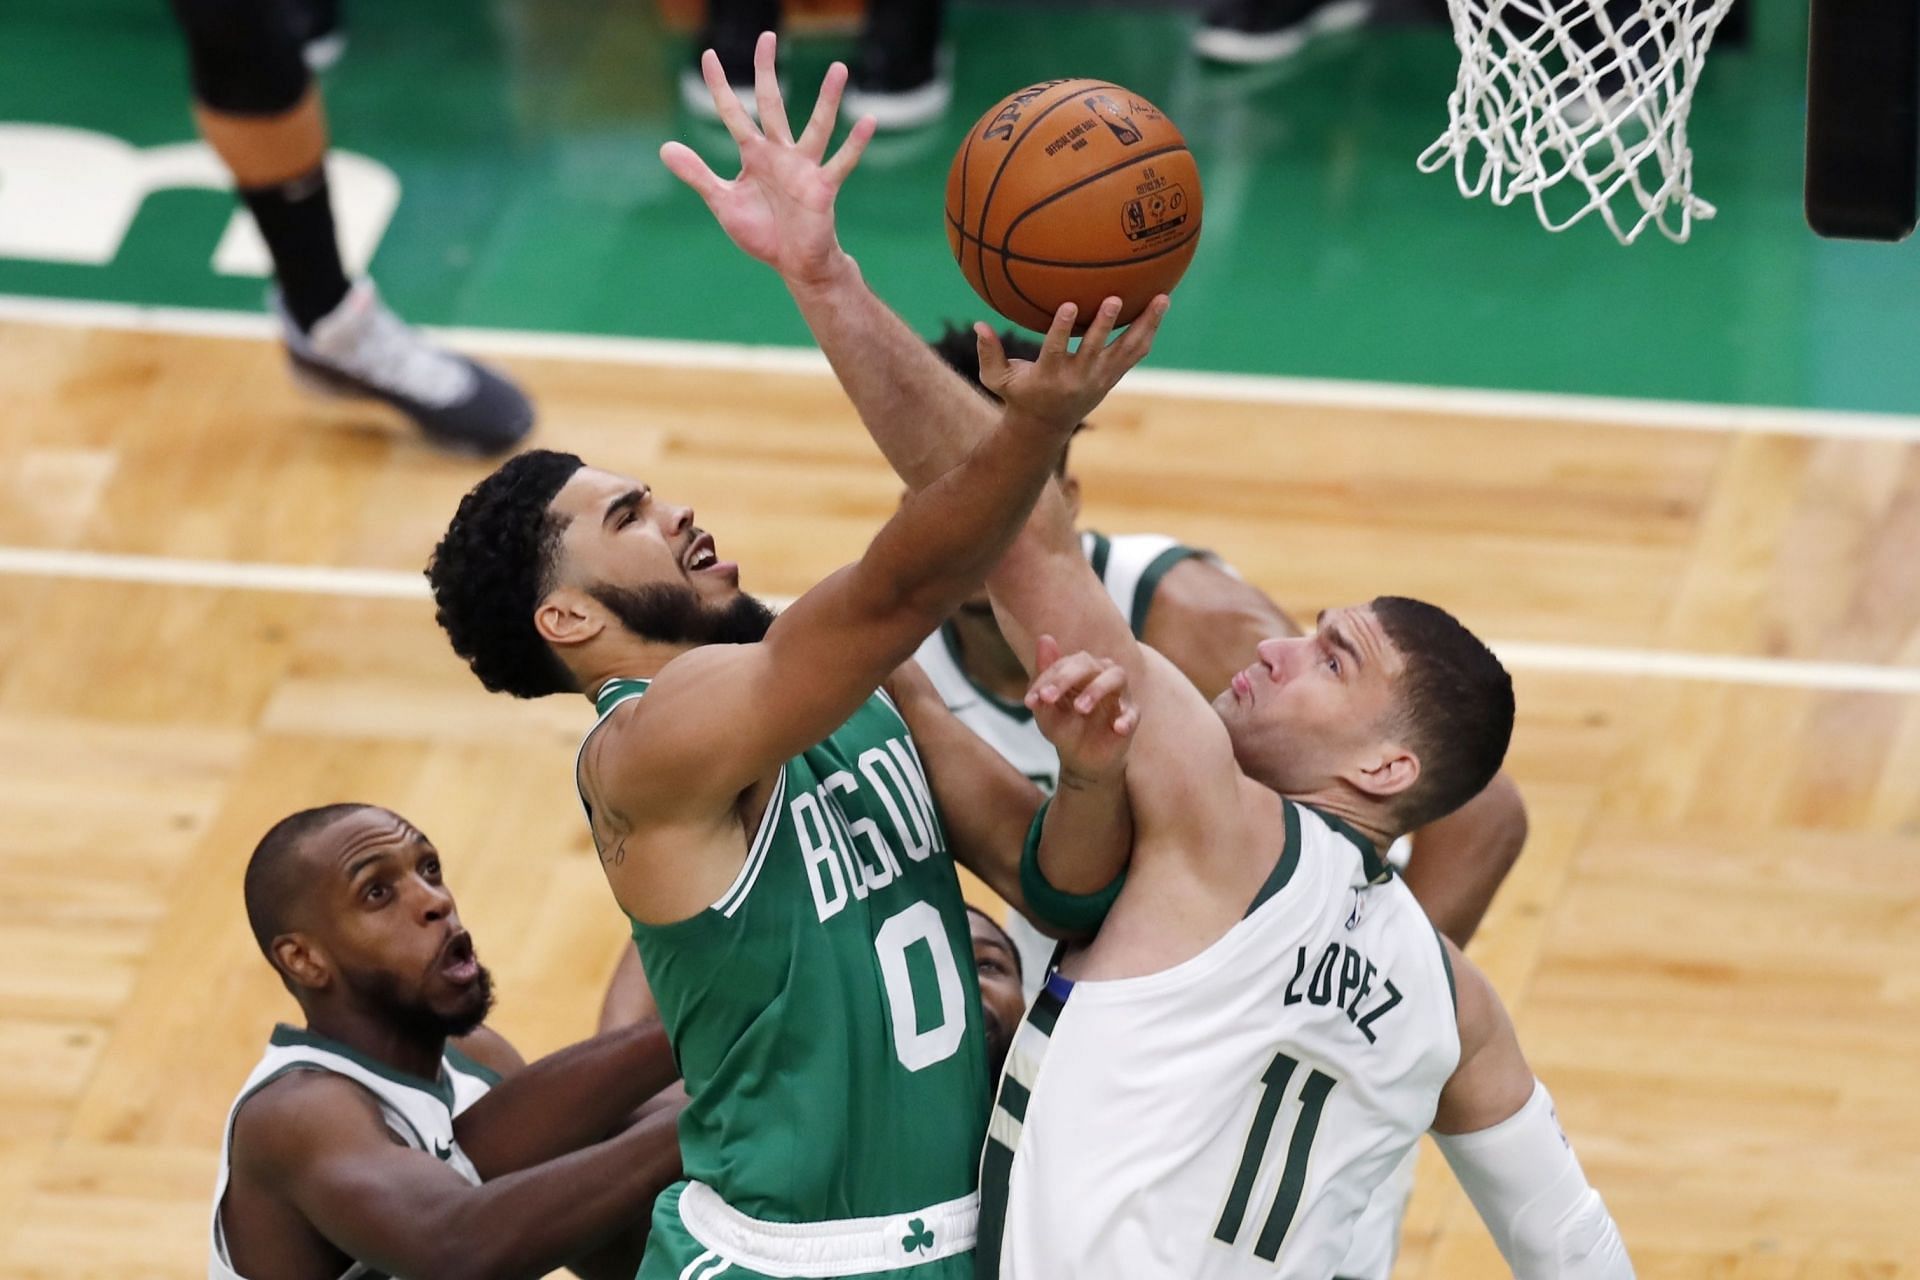 The Boston Celtics have regained home court advantage after a crucial win on the road against the defending champs. [Photo: Bleacher Report]